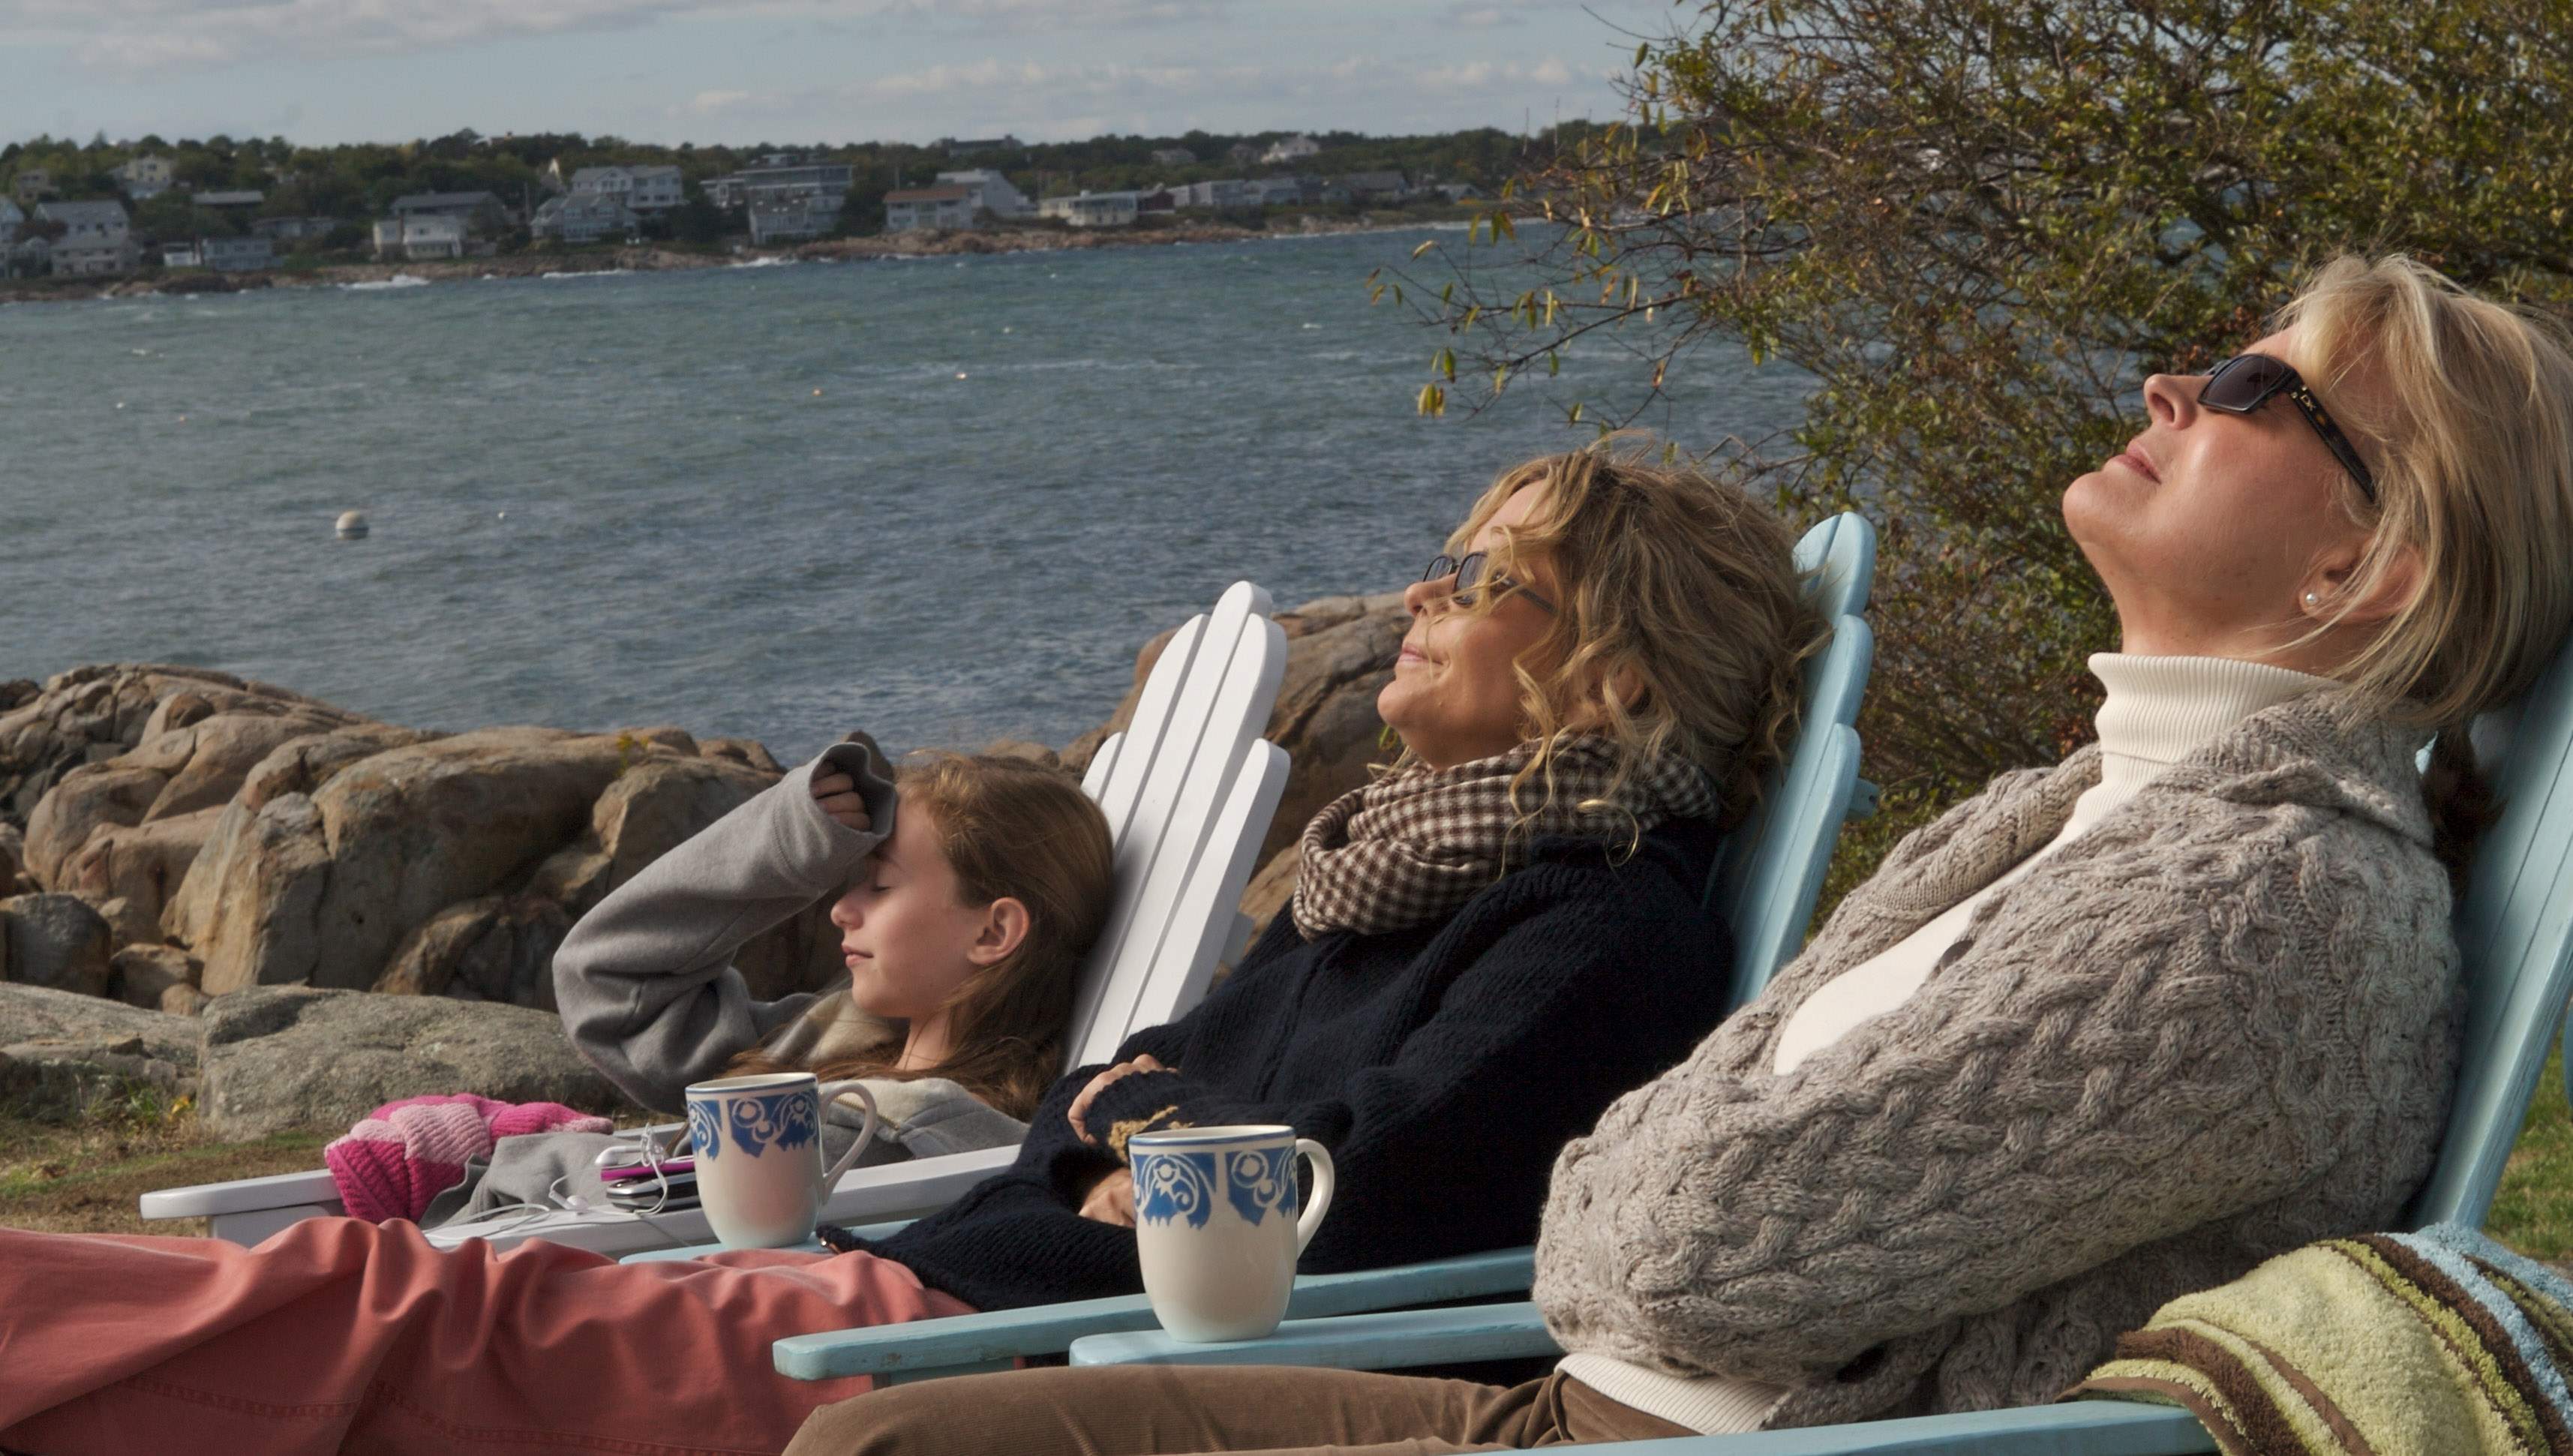 India Ennenga, Meg Ryan and Candice Bergen in a scene from The Women(c), directed by Diane English - 2008 - A Picturehouse release / photographer: Claudette Barius.